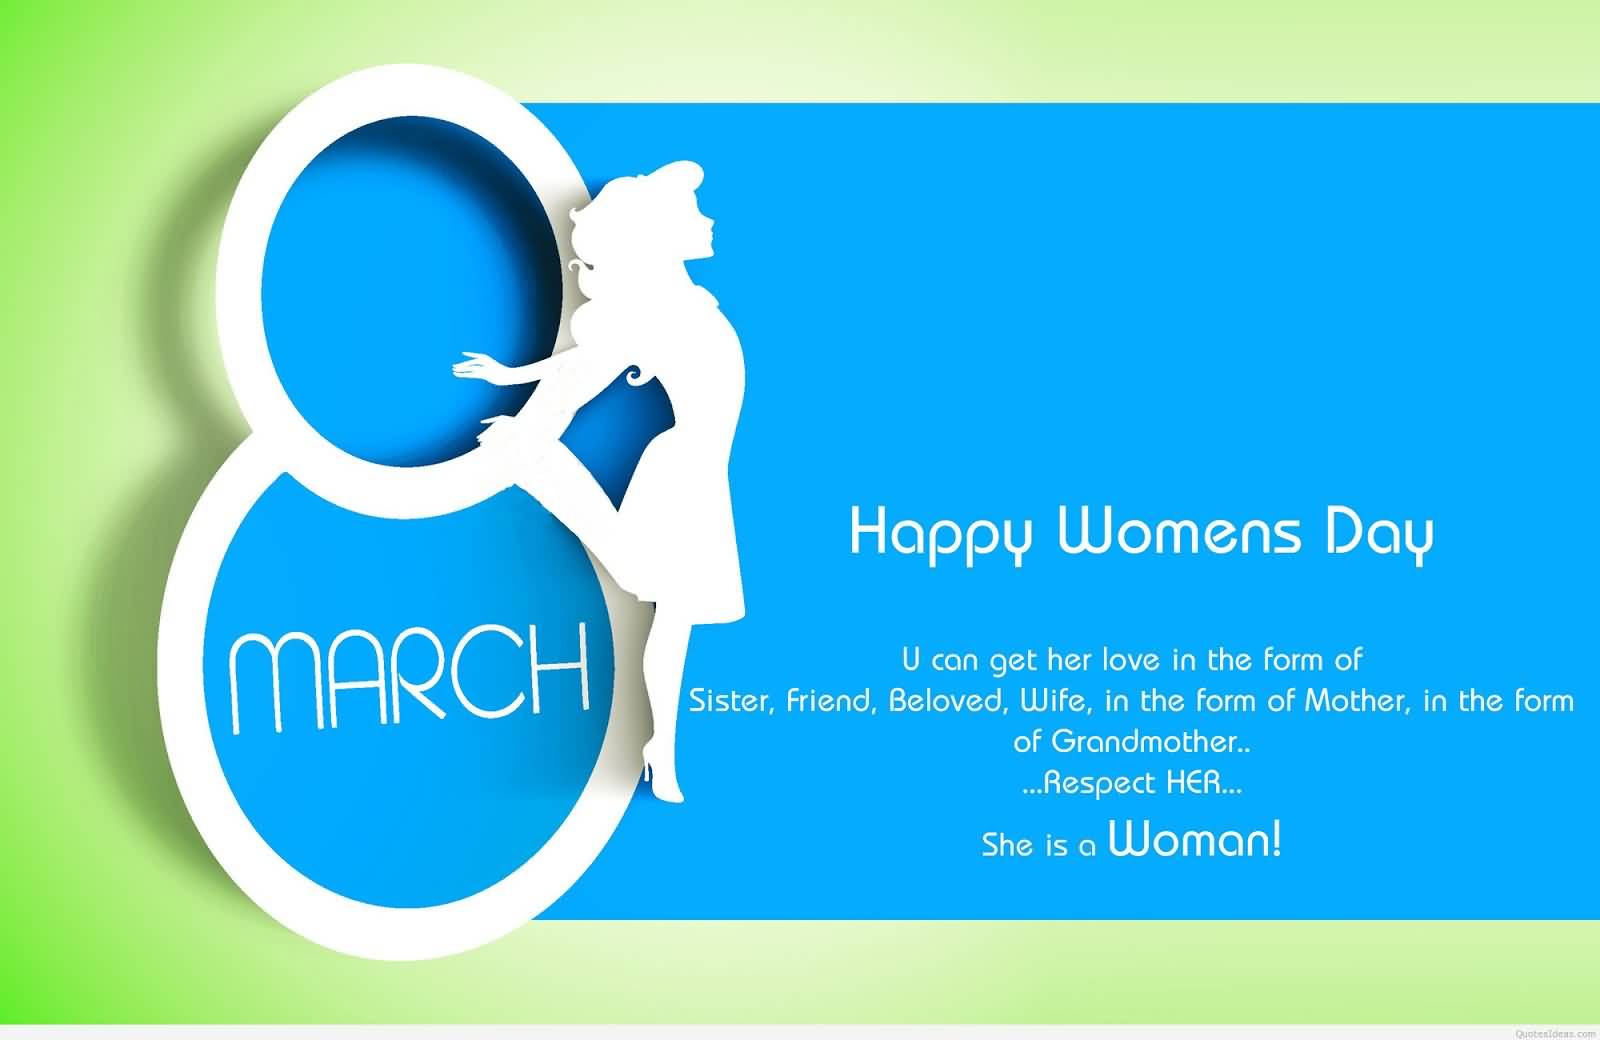 8 March Happy Women’s Day Card